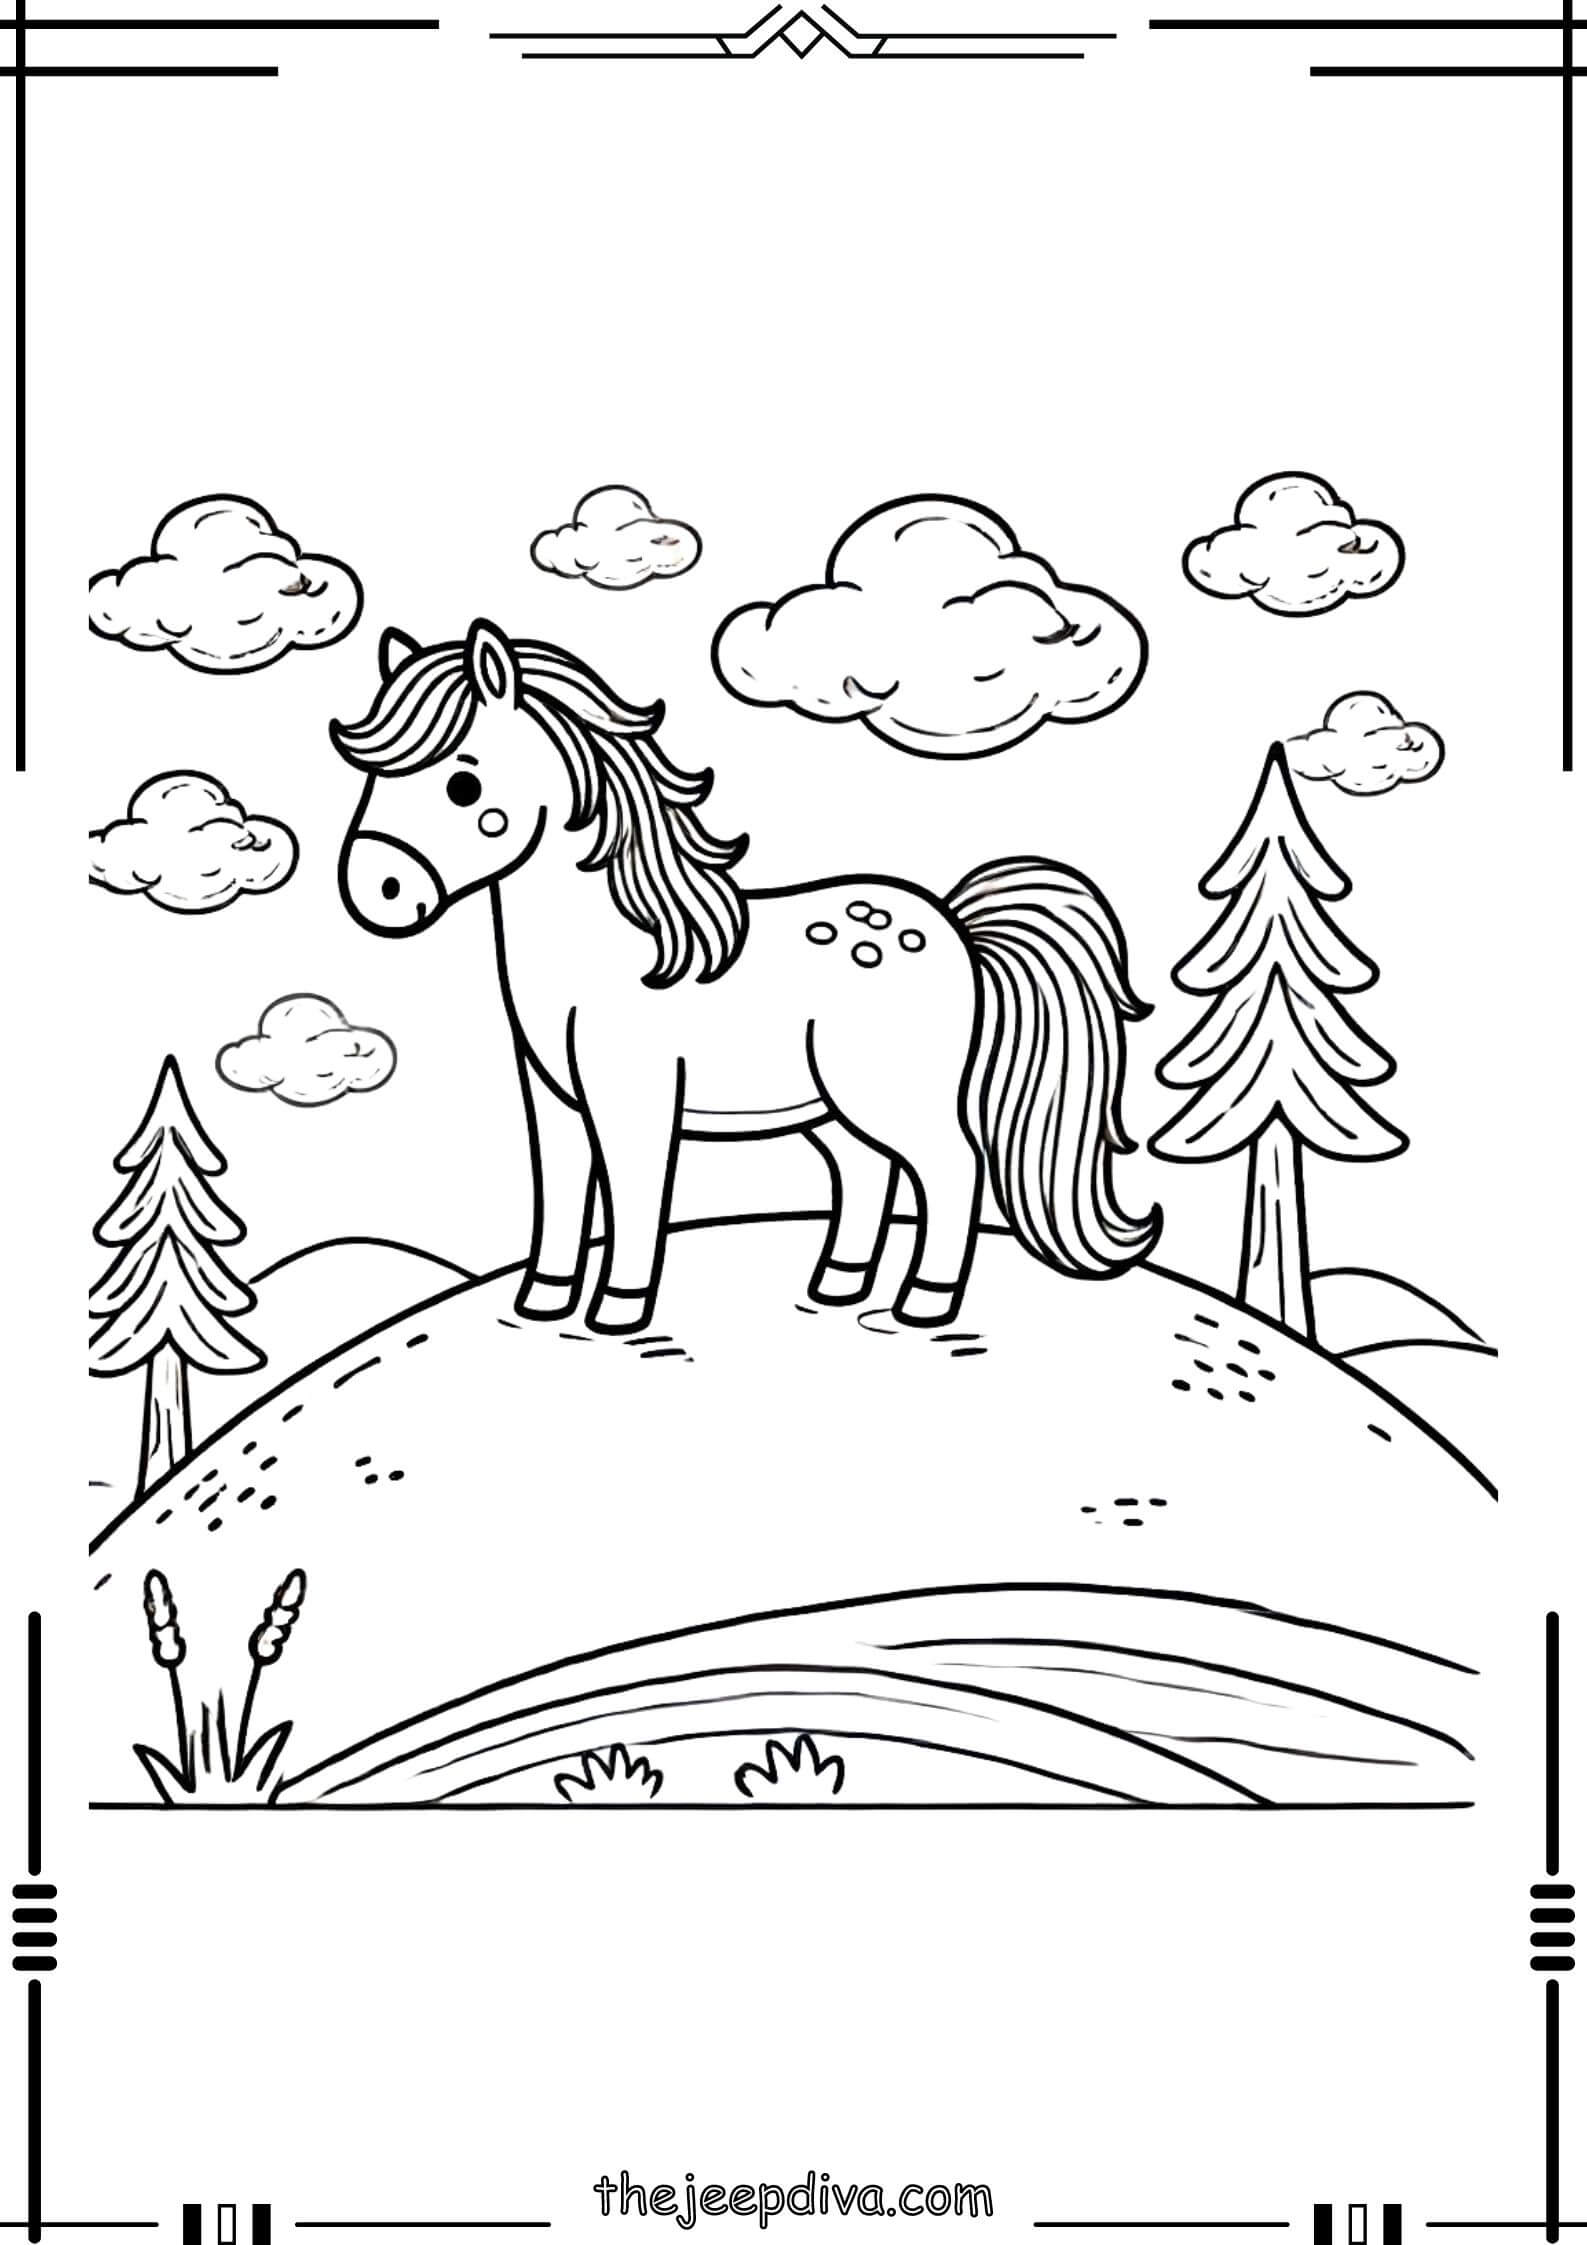 Horse-Colouring-Pages-Medium-3